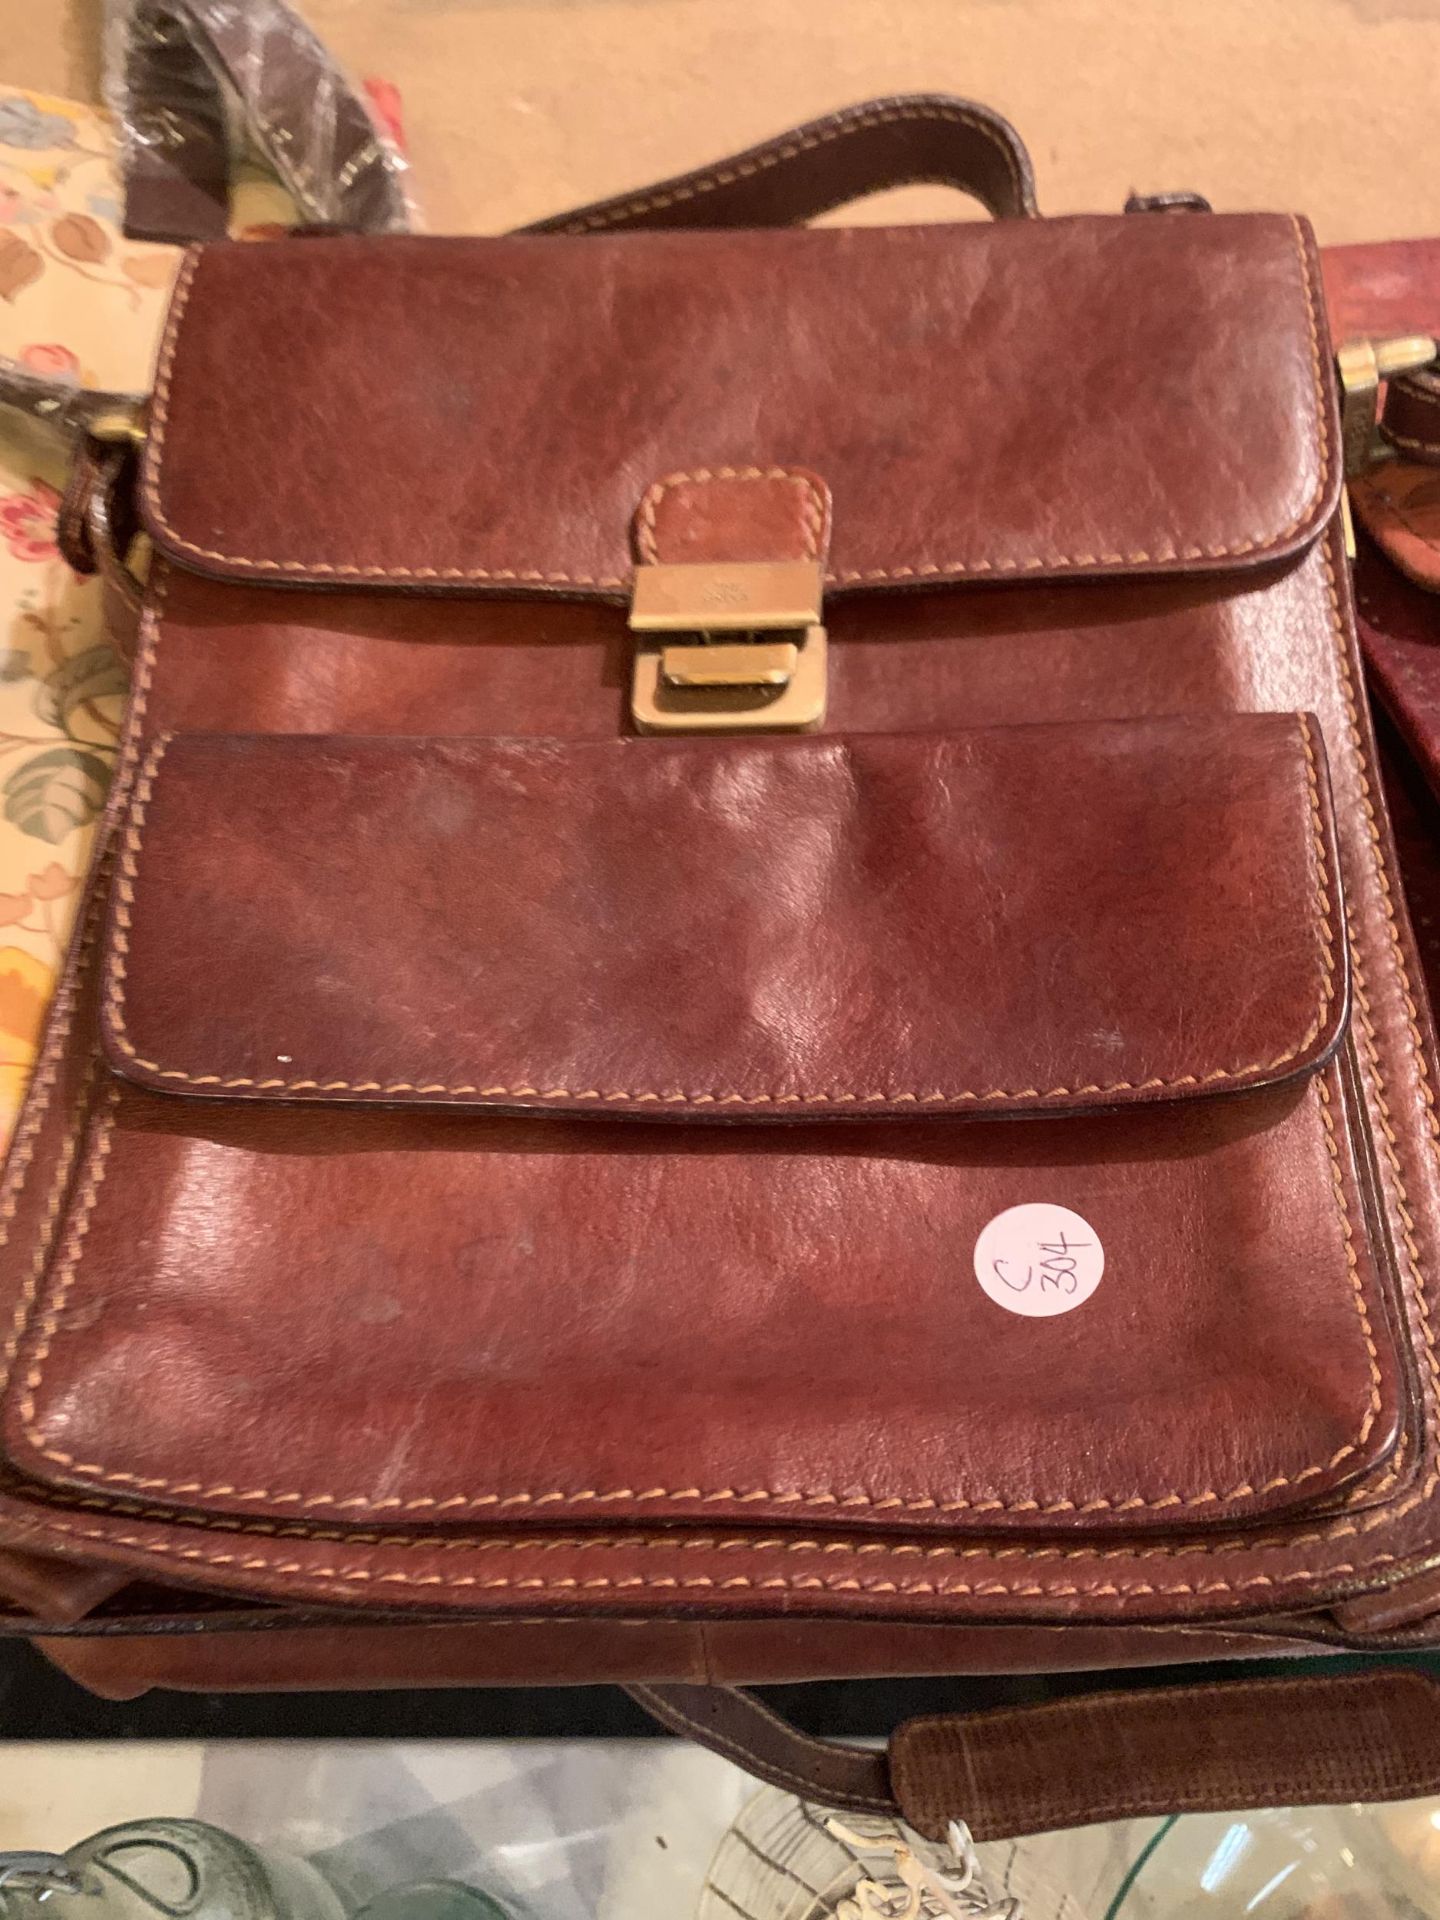 THREE BROWN LEATHER CROSS BODY BAGS - Image 2 of 4